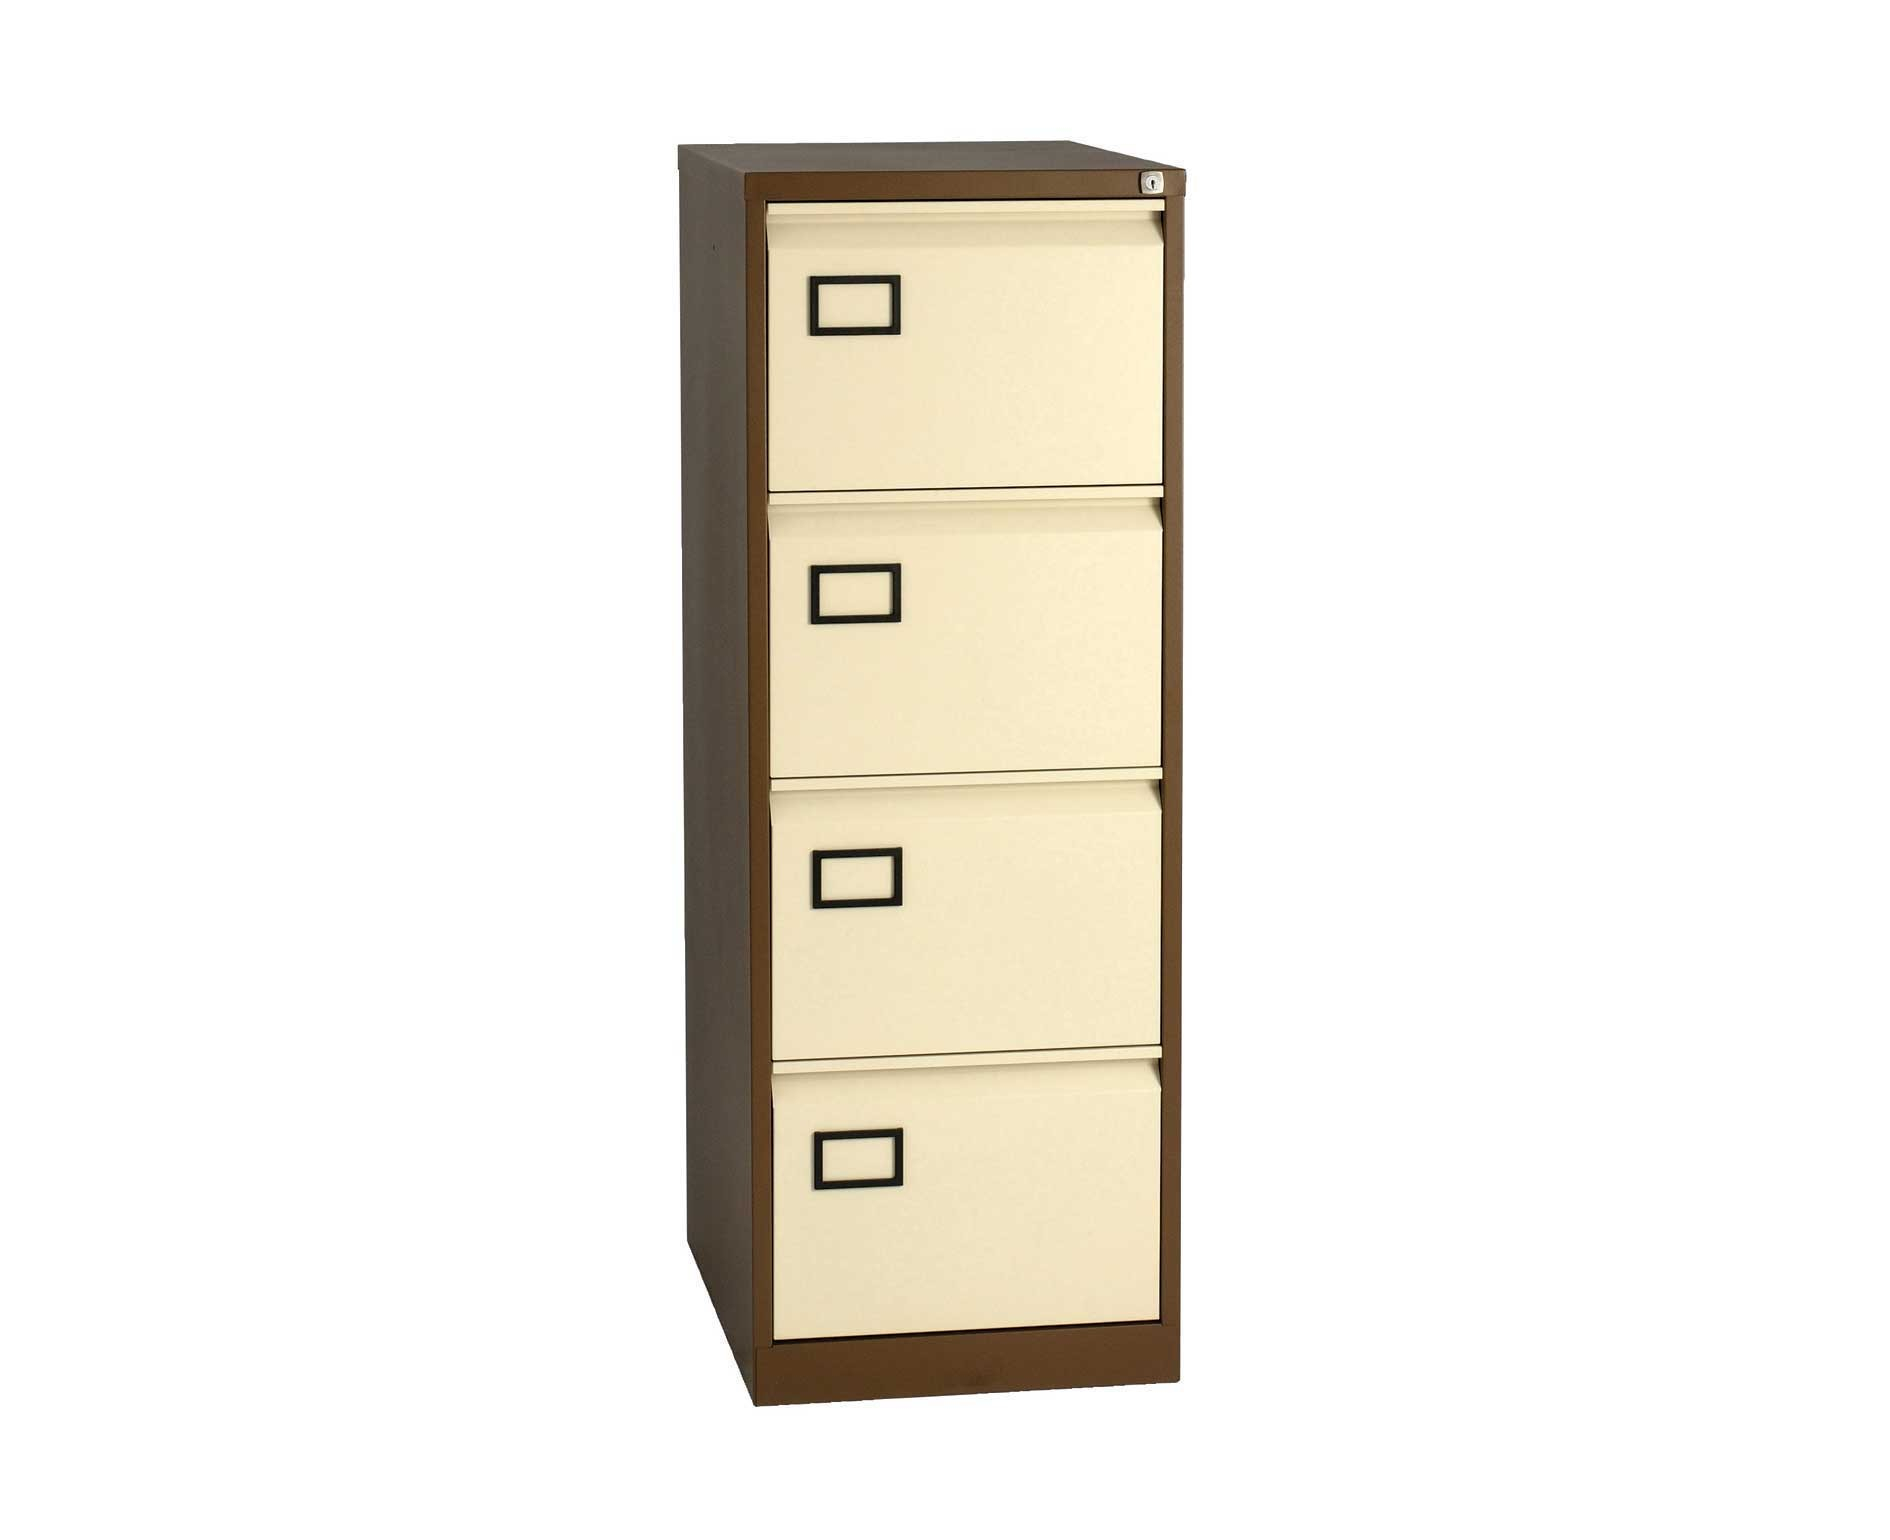 Bisley 4 Drawer Filing Cabinet Foolscap Coffee Cream Filing intended for size 1890 X 1540